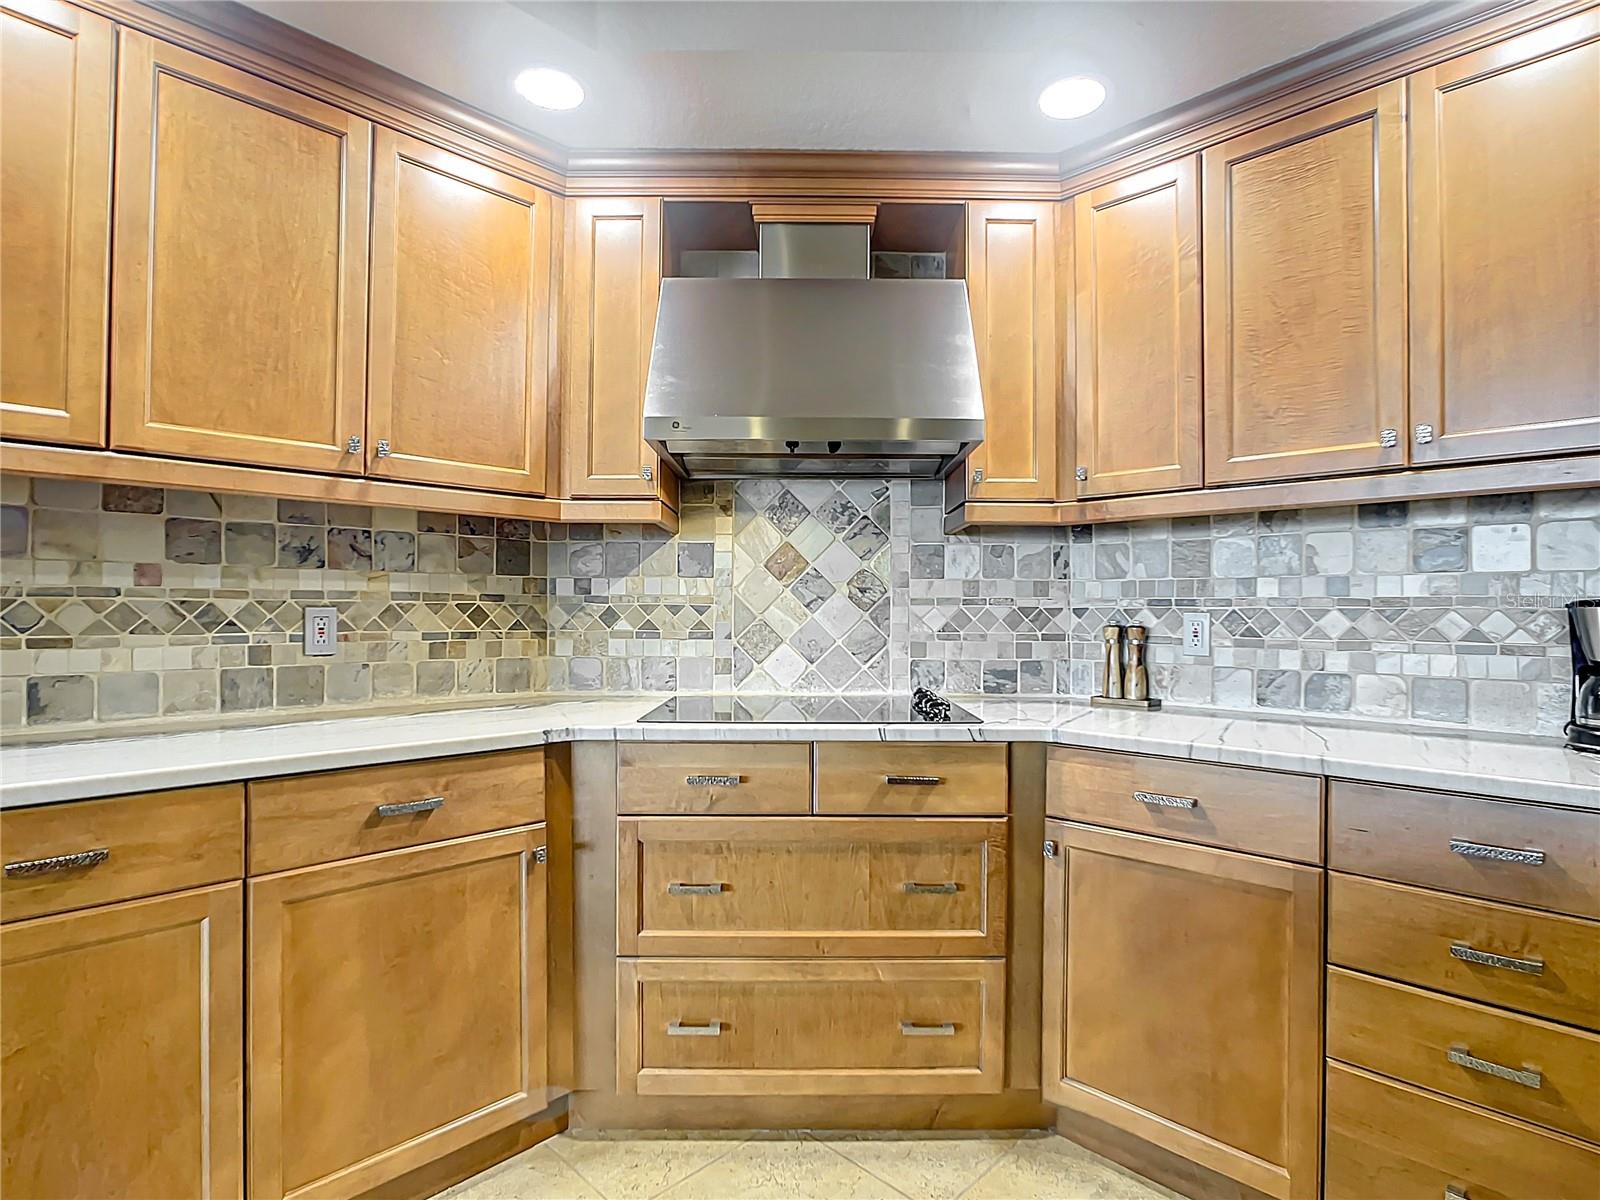 This kitchen view highlights the beautiful backsplash & the pull out drawers in the kitchen